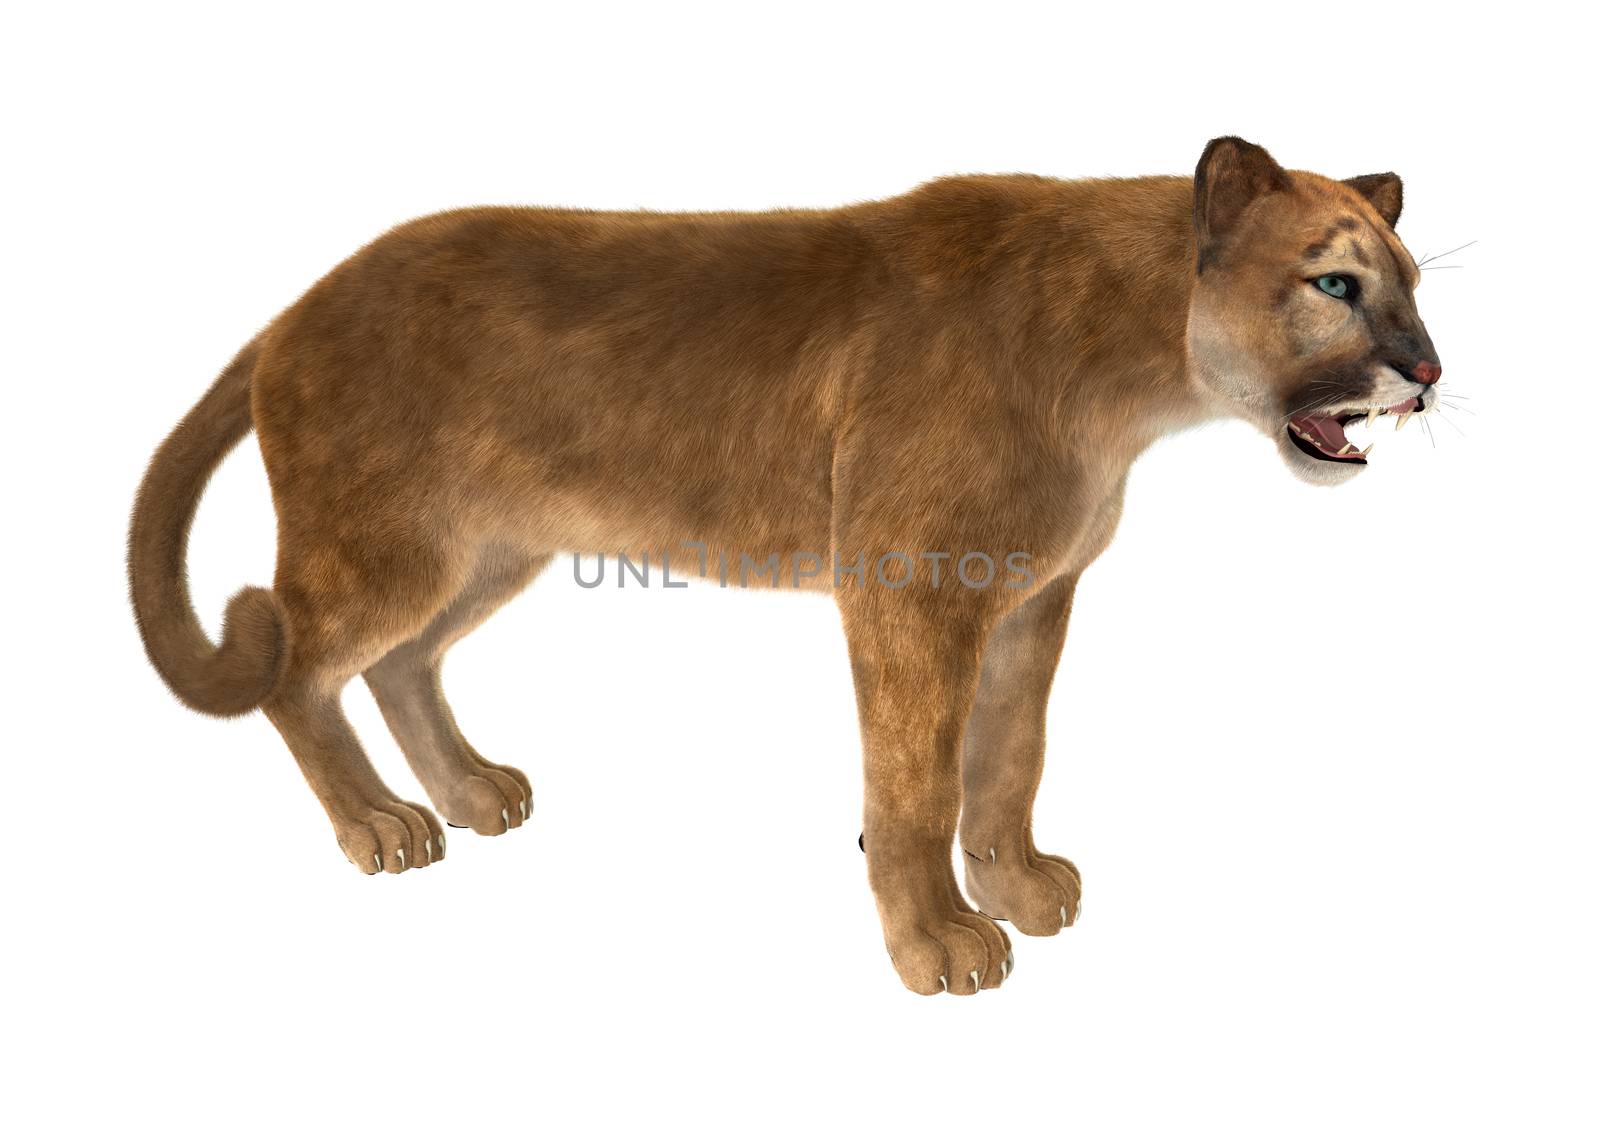 3D digital render of a big cat puma iisolated on white background